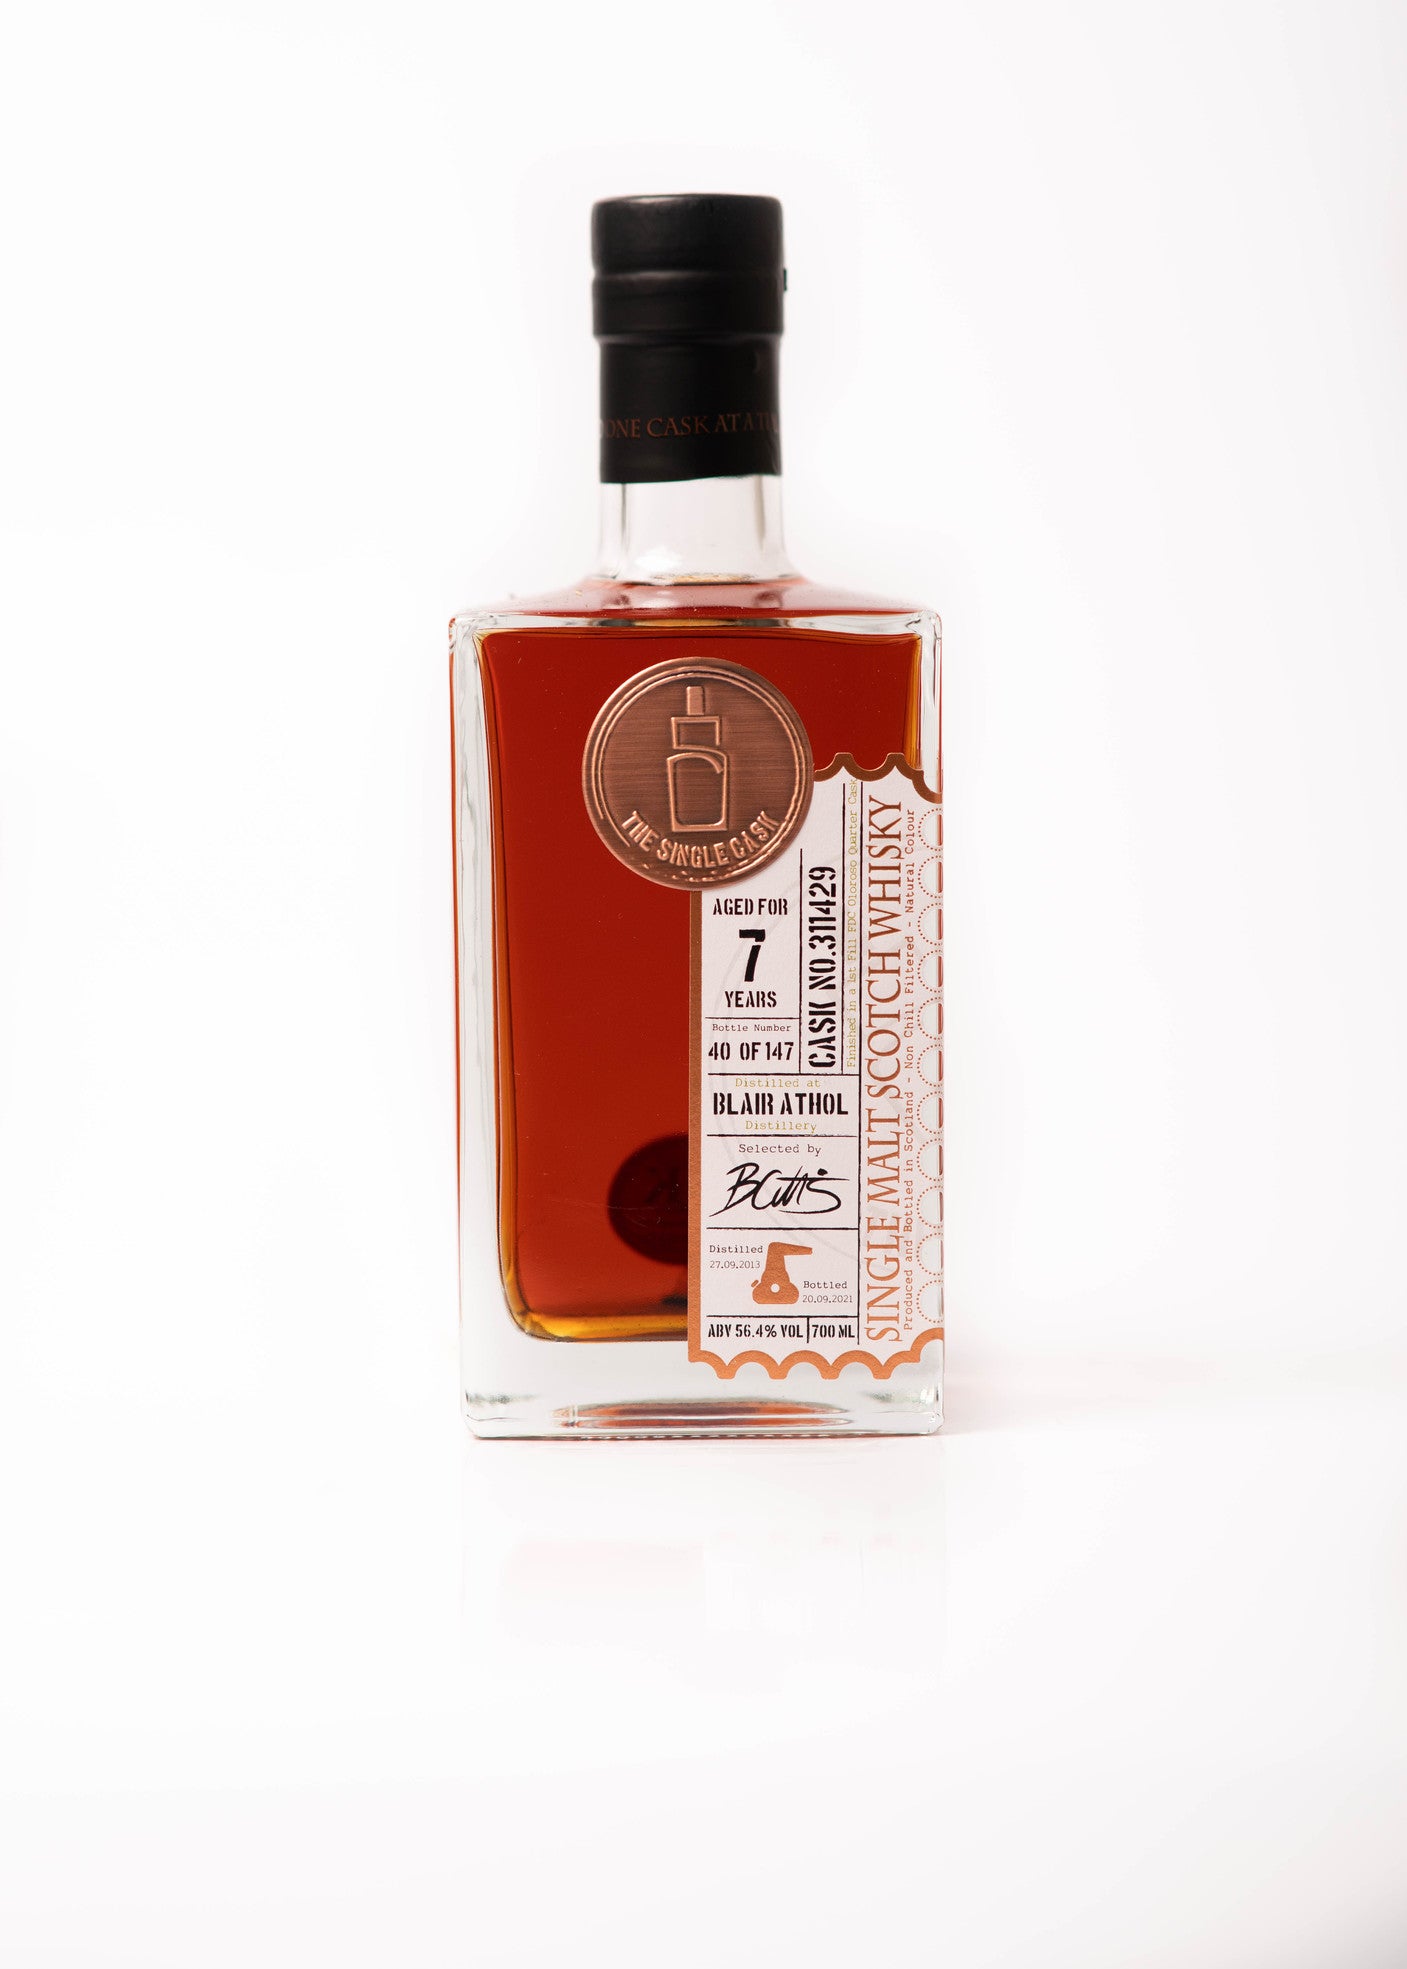 Blair Athol 7 years old scotch whisky from The Single Cask